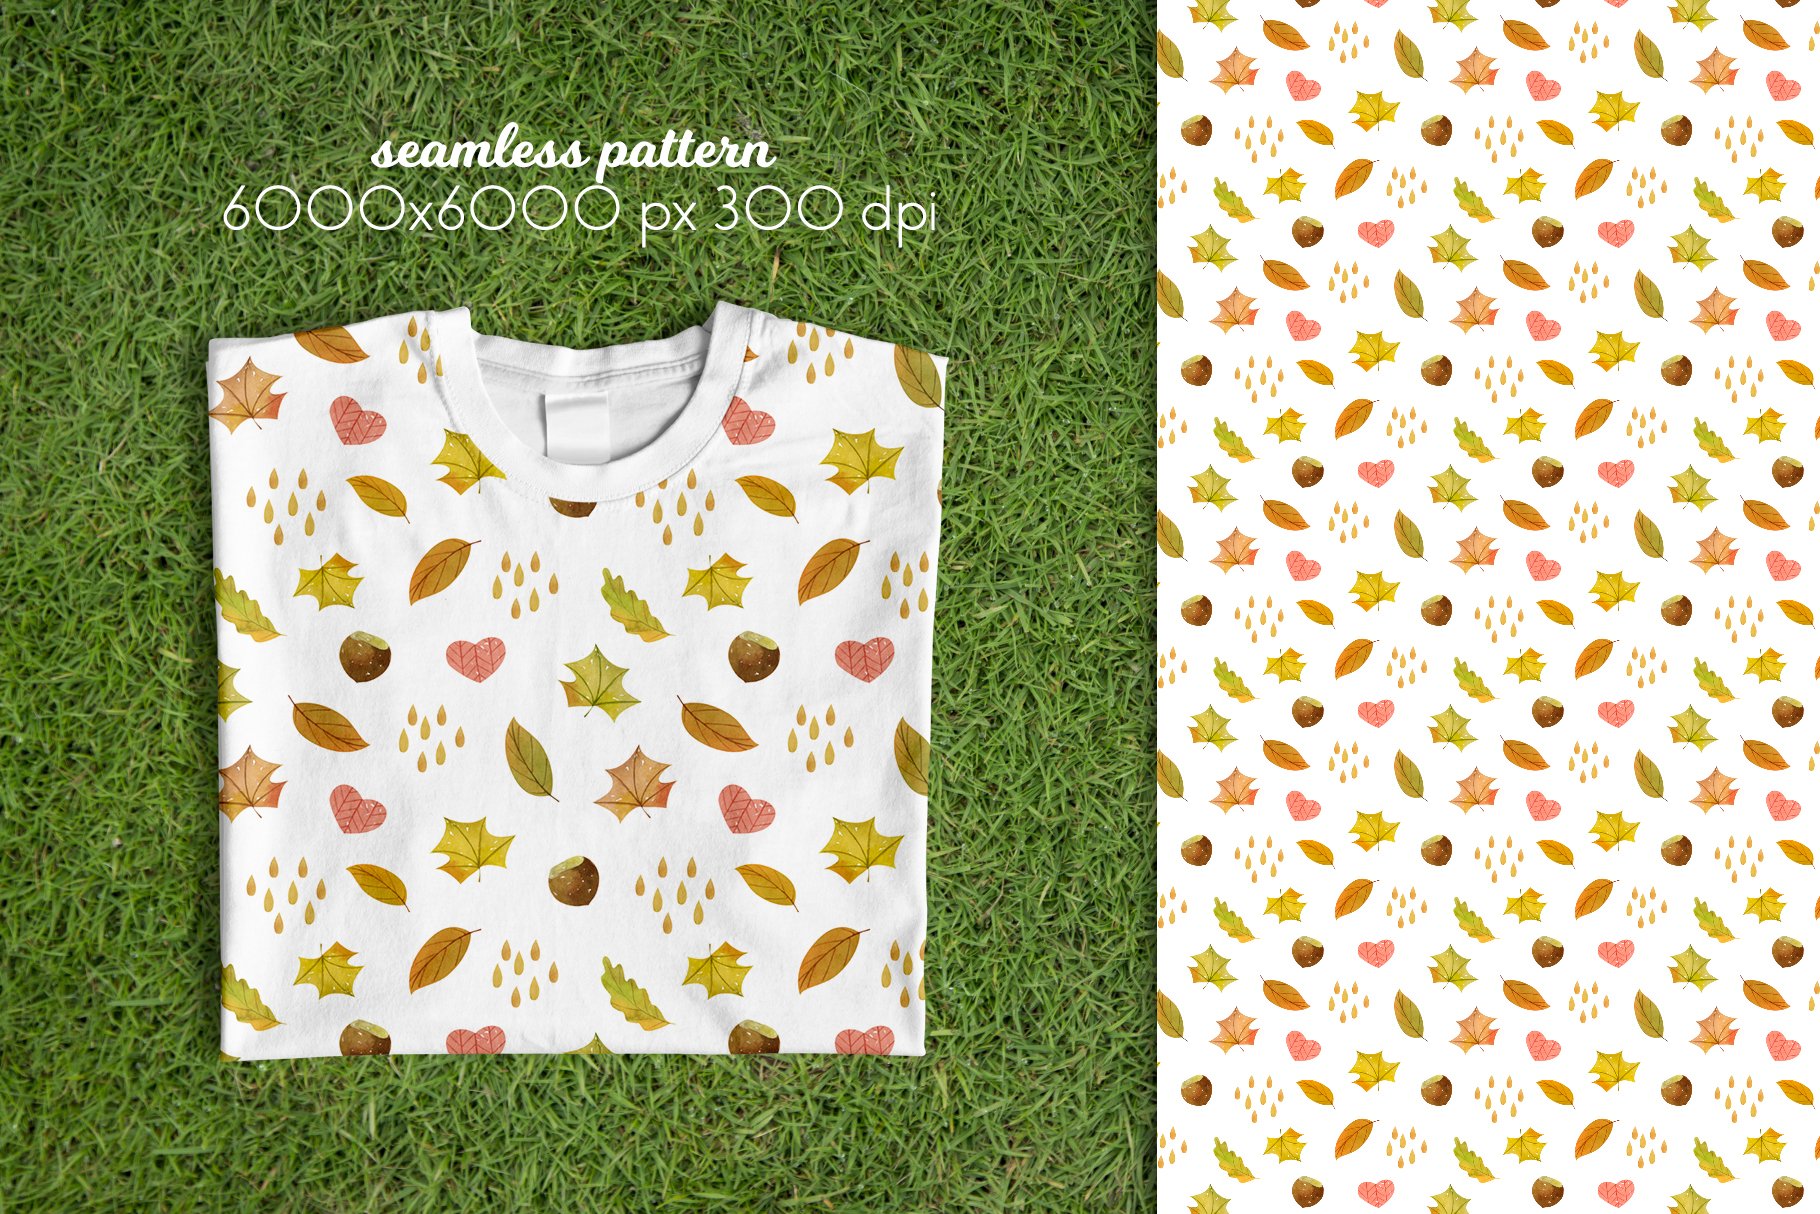 Classic white t-shirt with autumn leaves.